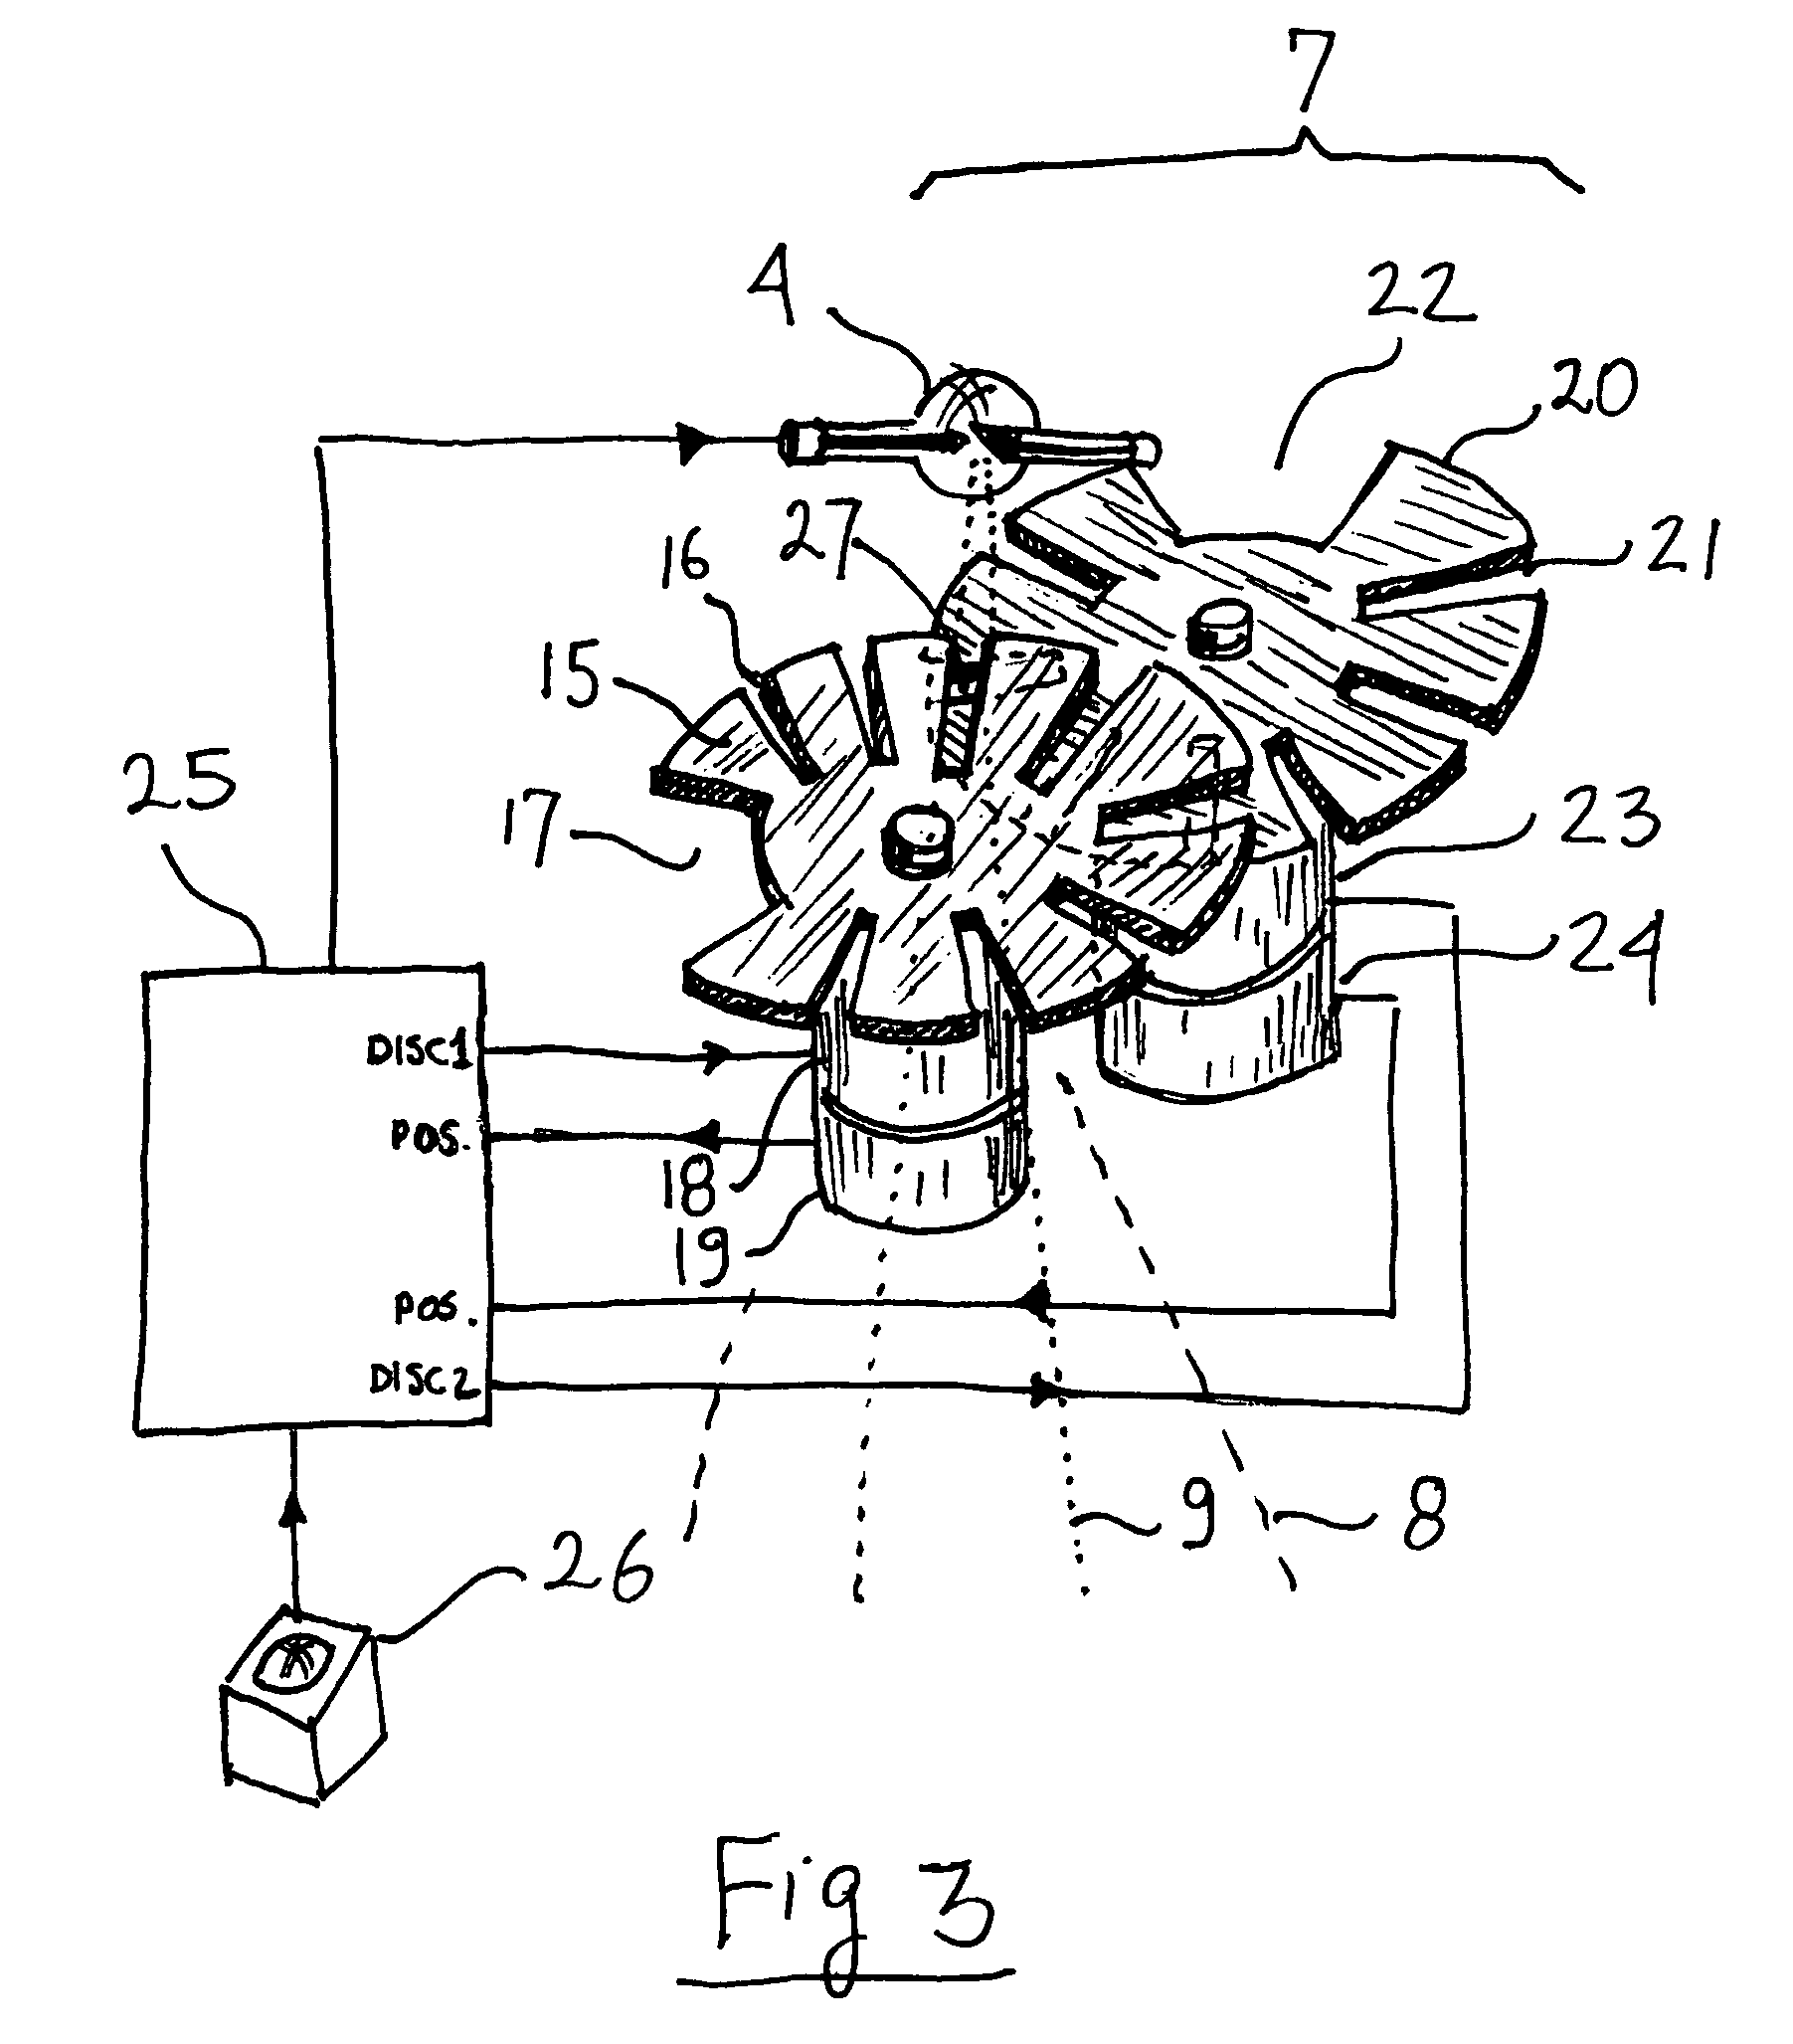 System for reduction of exposure to X-ray radiation